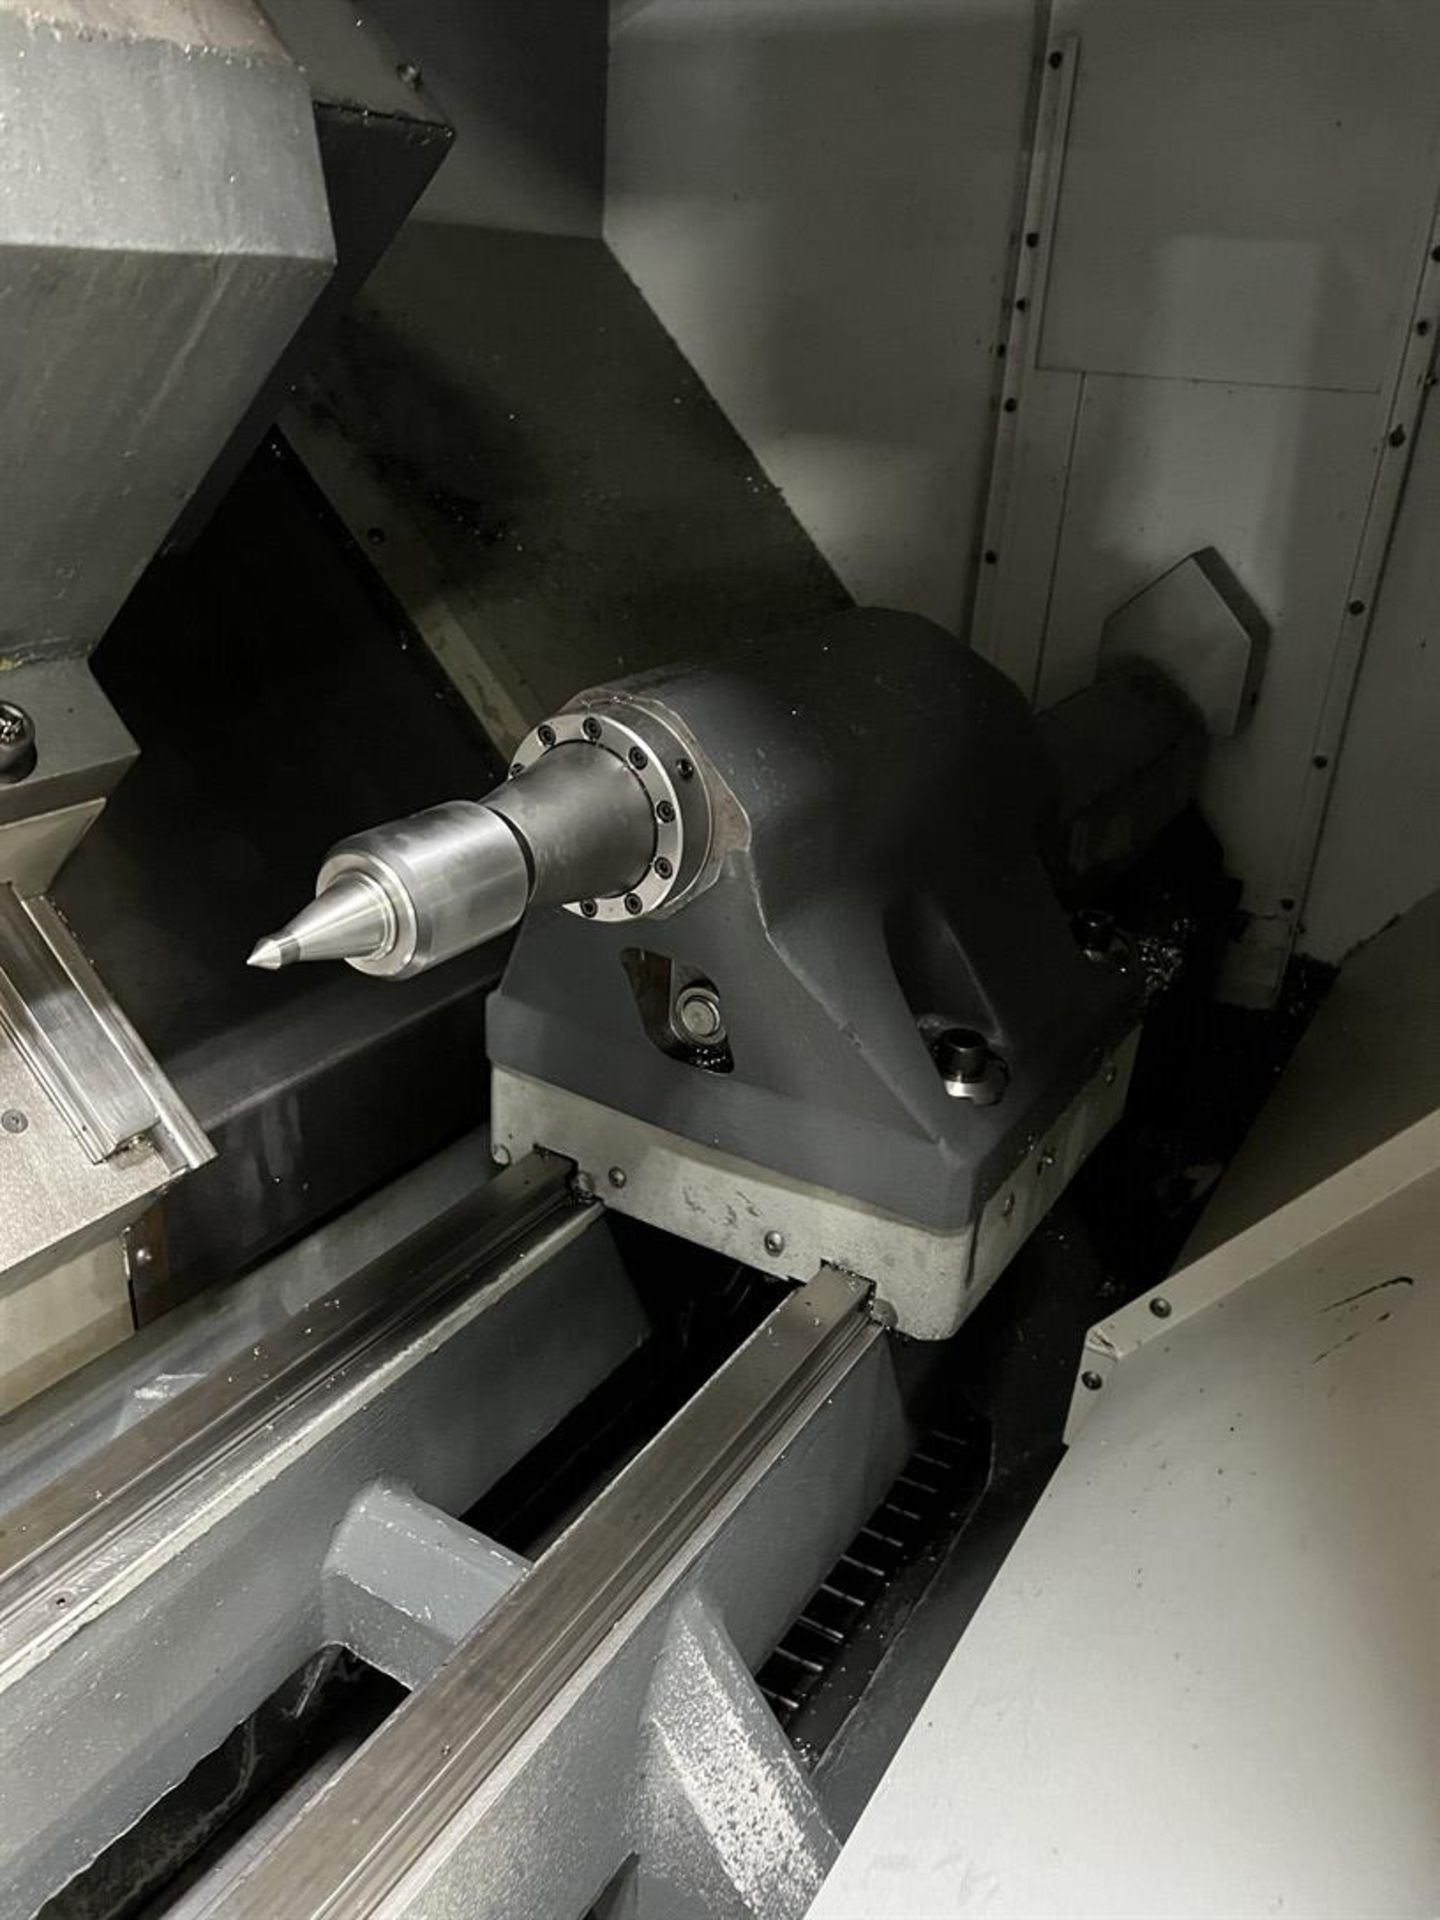 2013 HAAS ST-30 Turning Center, s/n 3095356, HAAS CNC Control, 12” 3-Jaw Chuck, 12-Position - Image 6 of 11